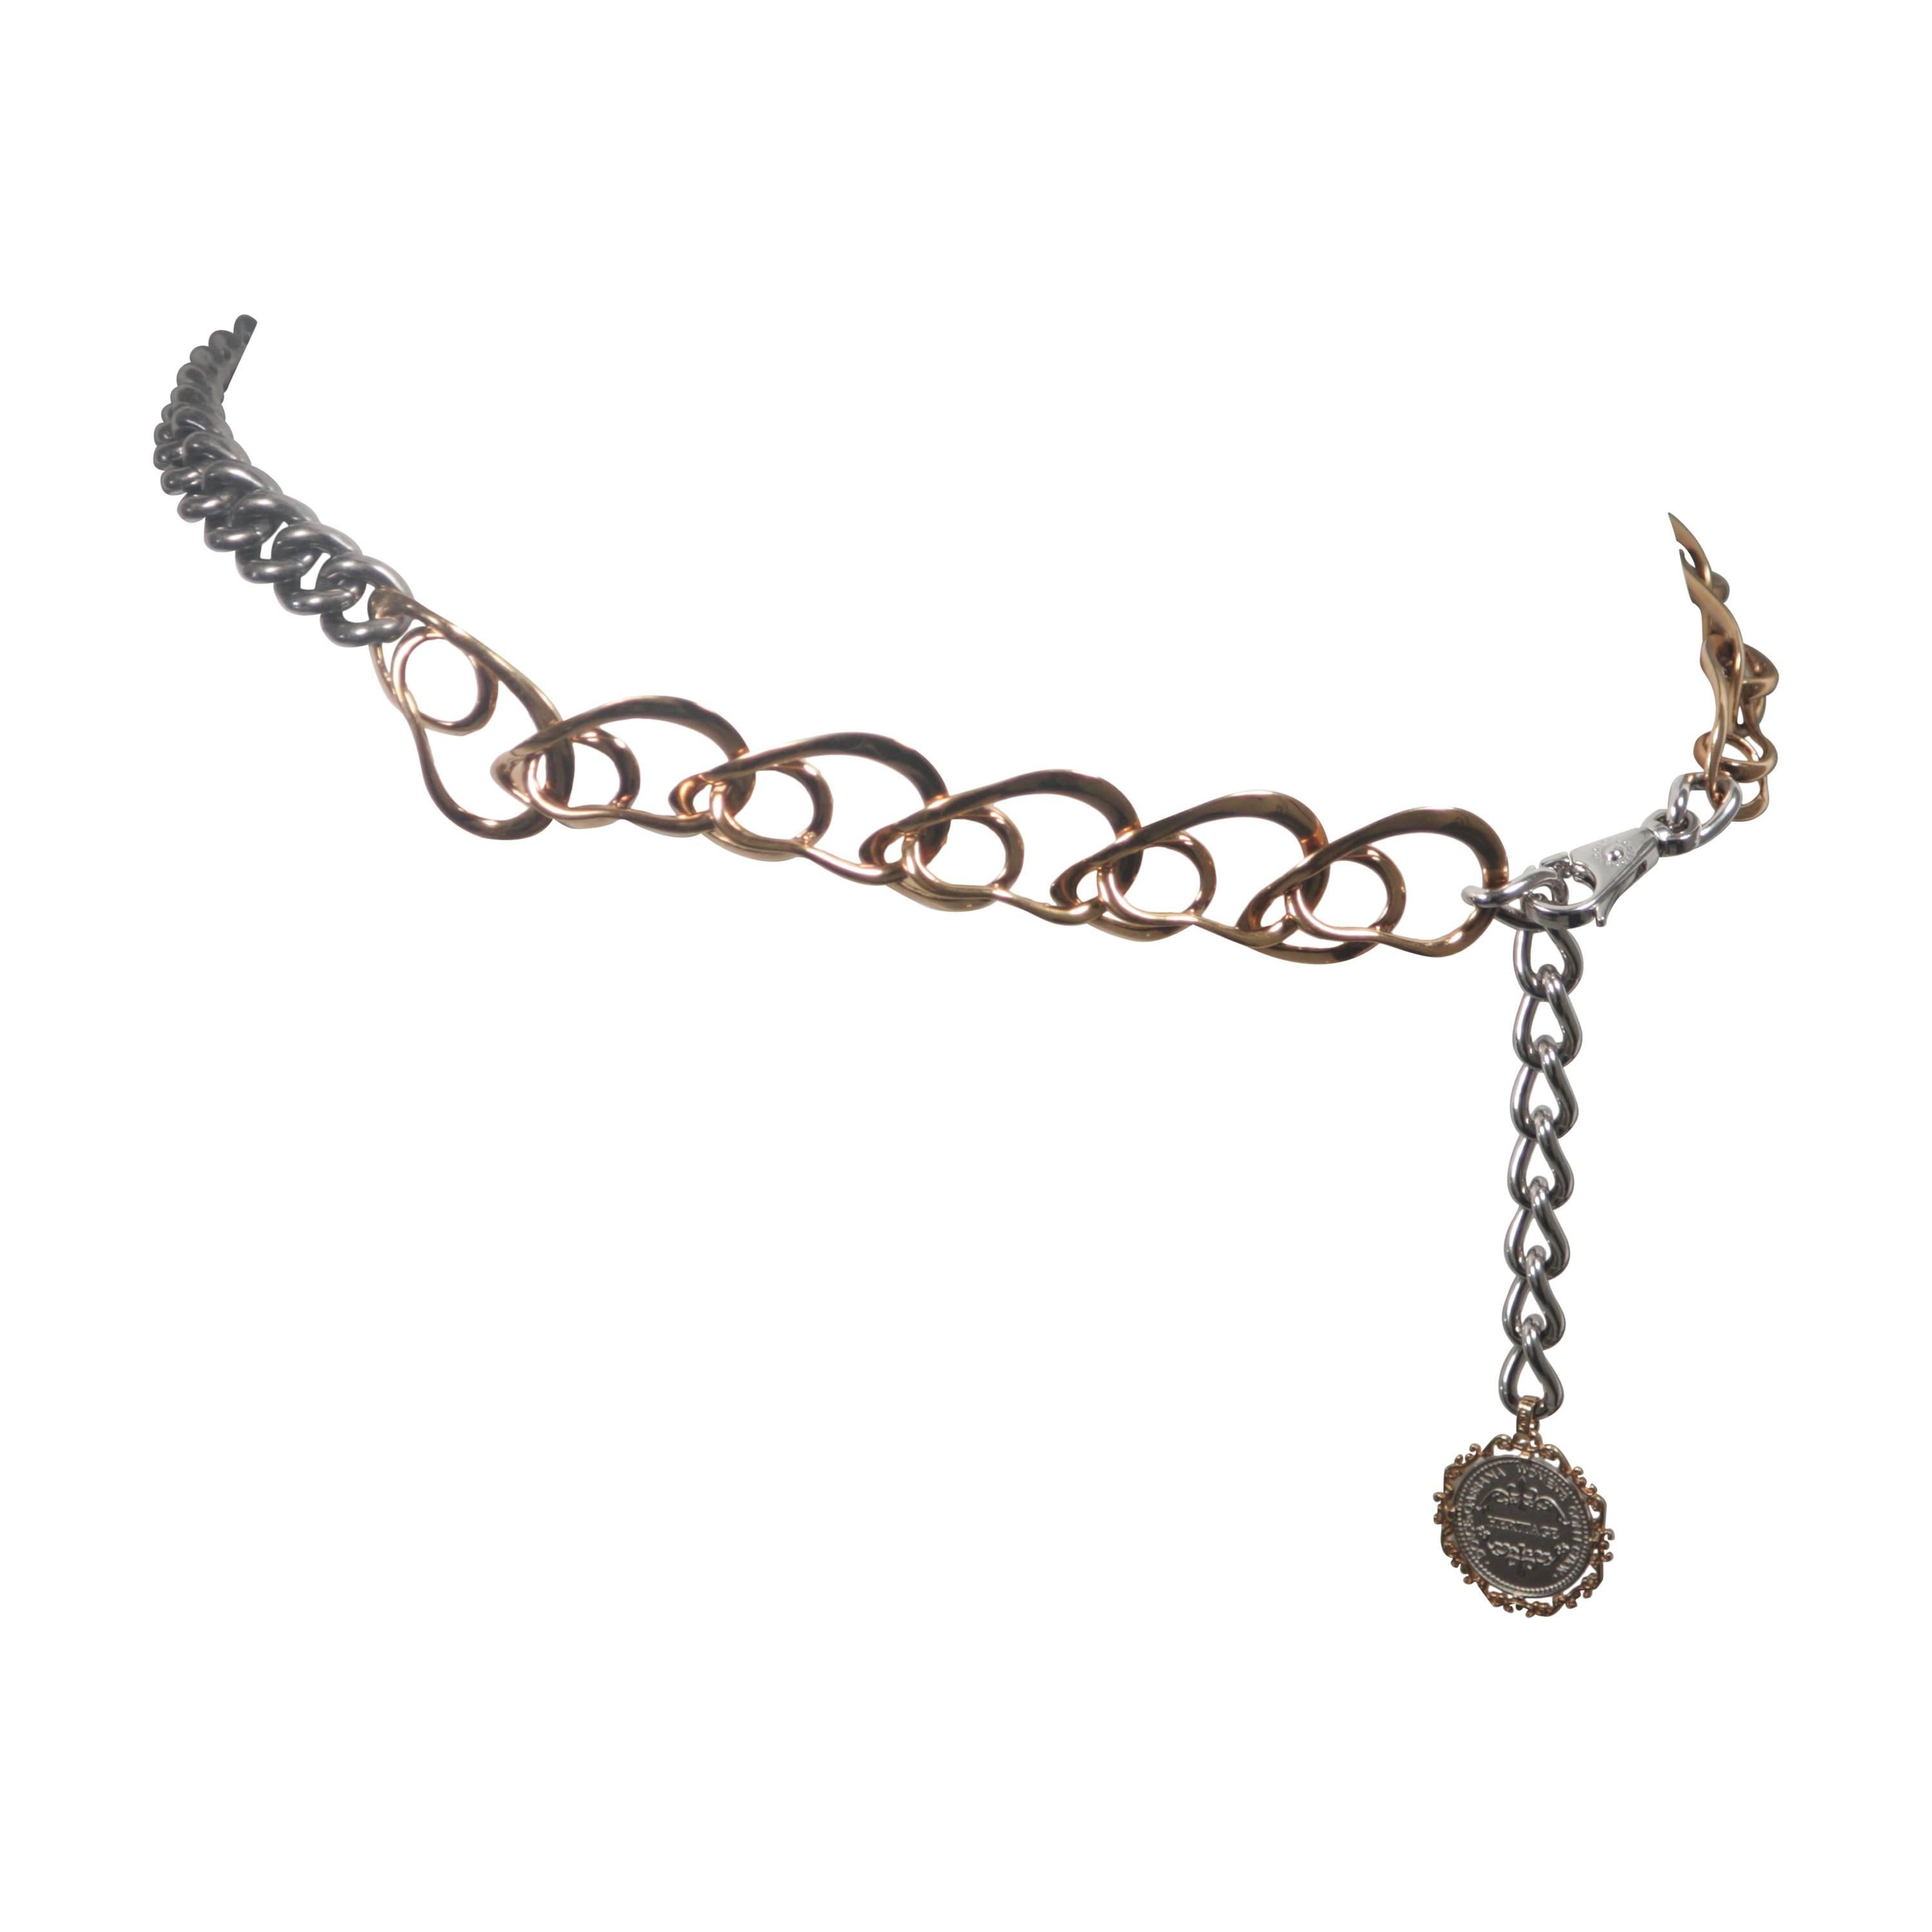 DOLCE AND GABBANA Multi-Metal Belt Necklace Accessory 